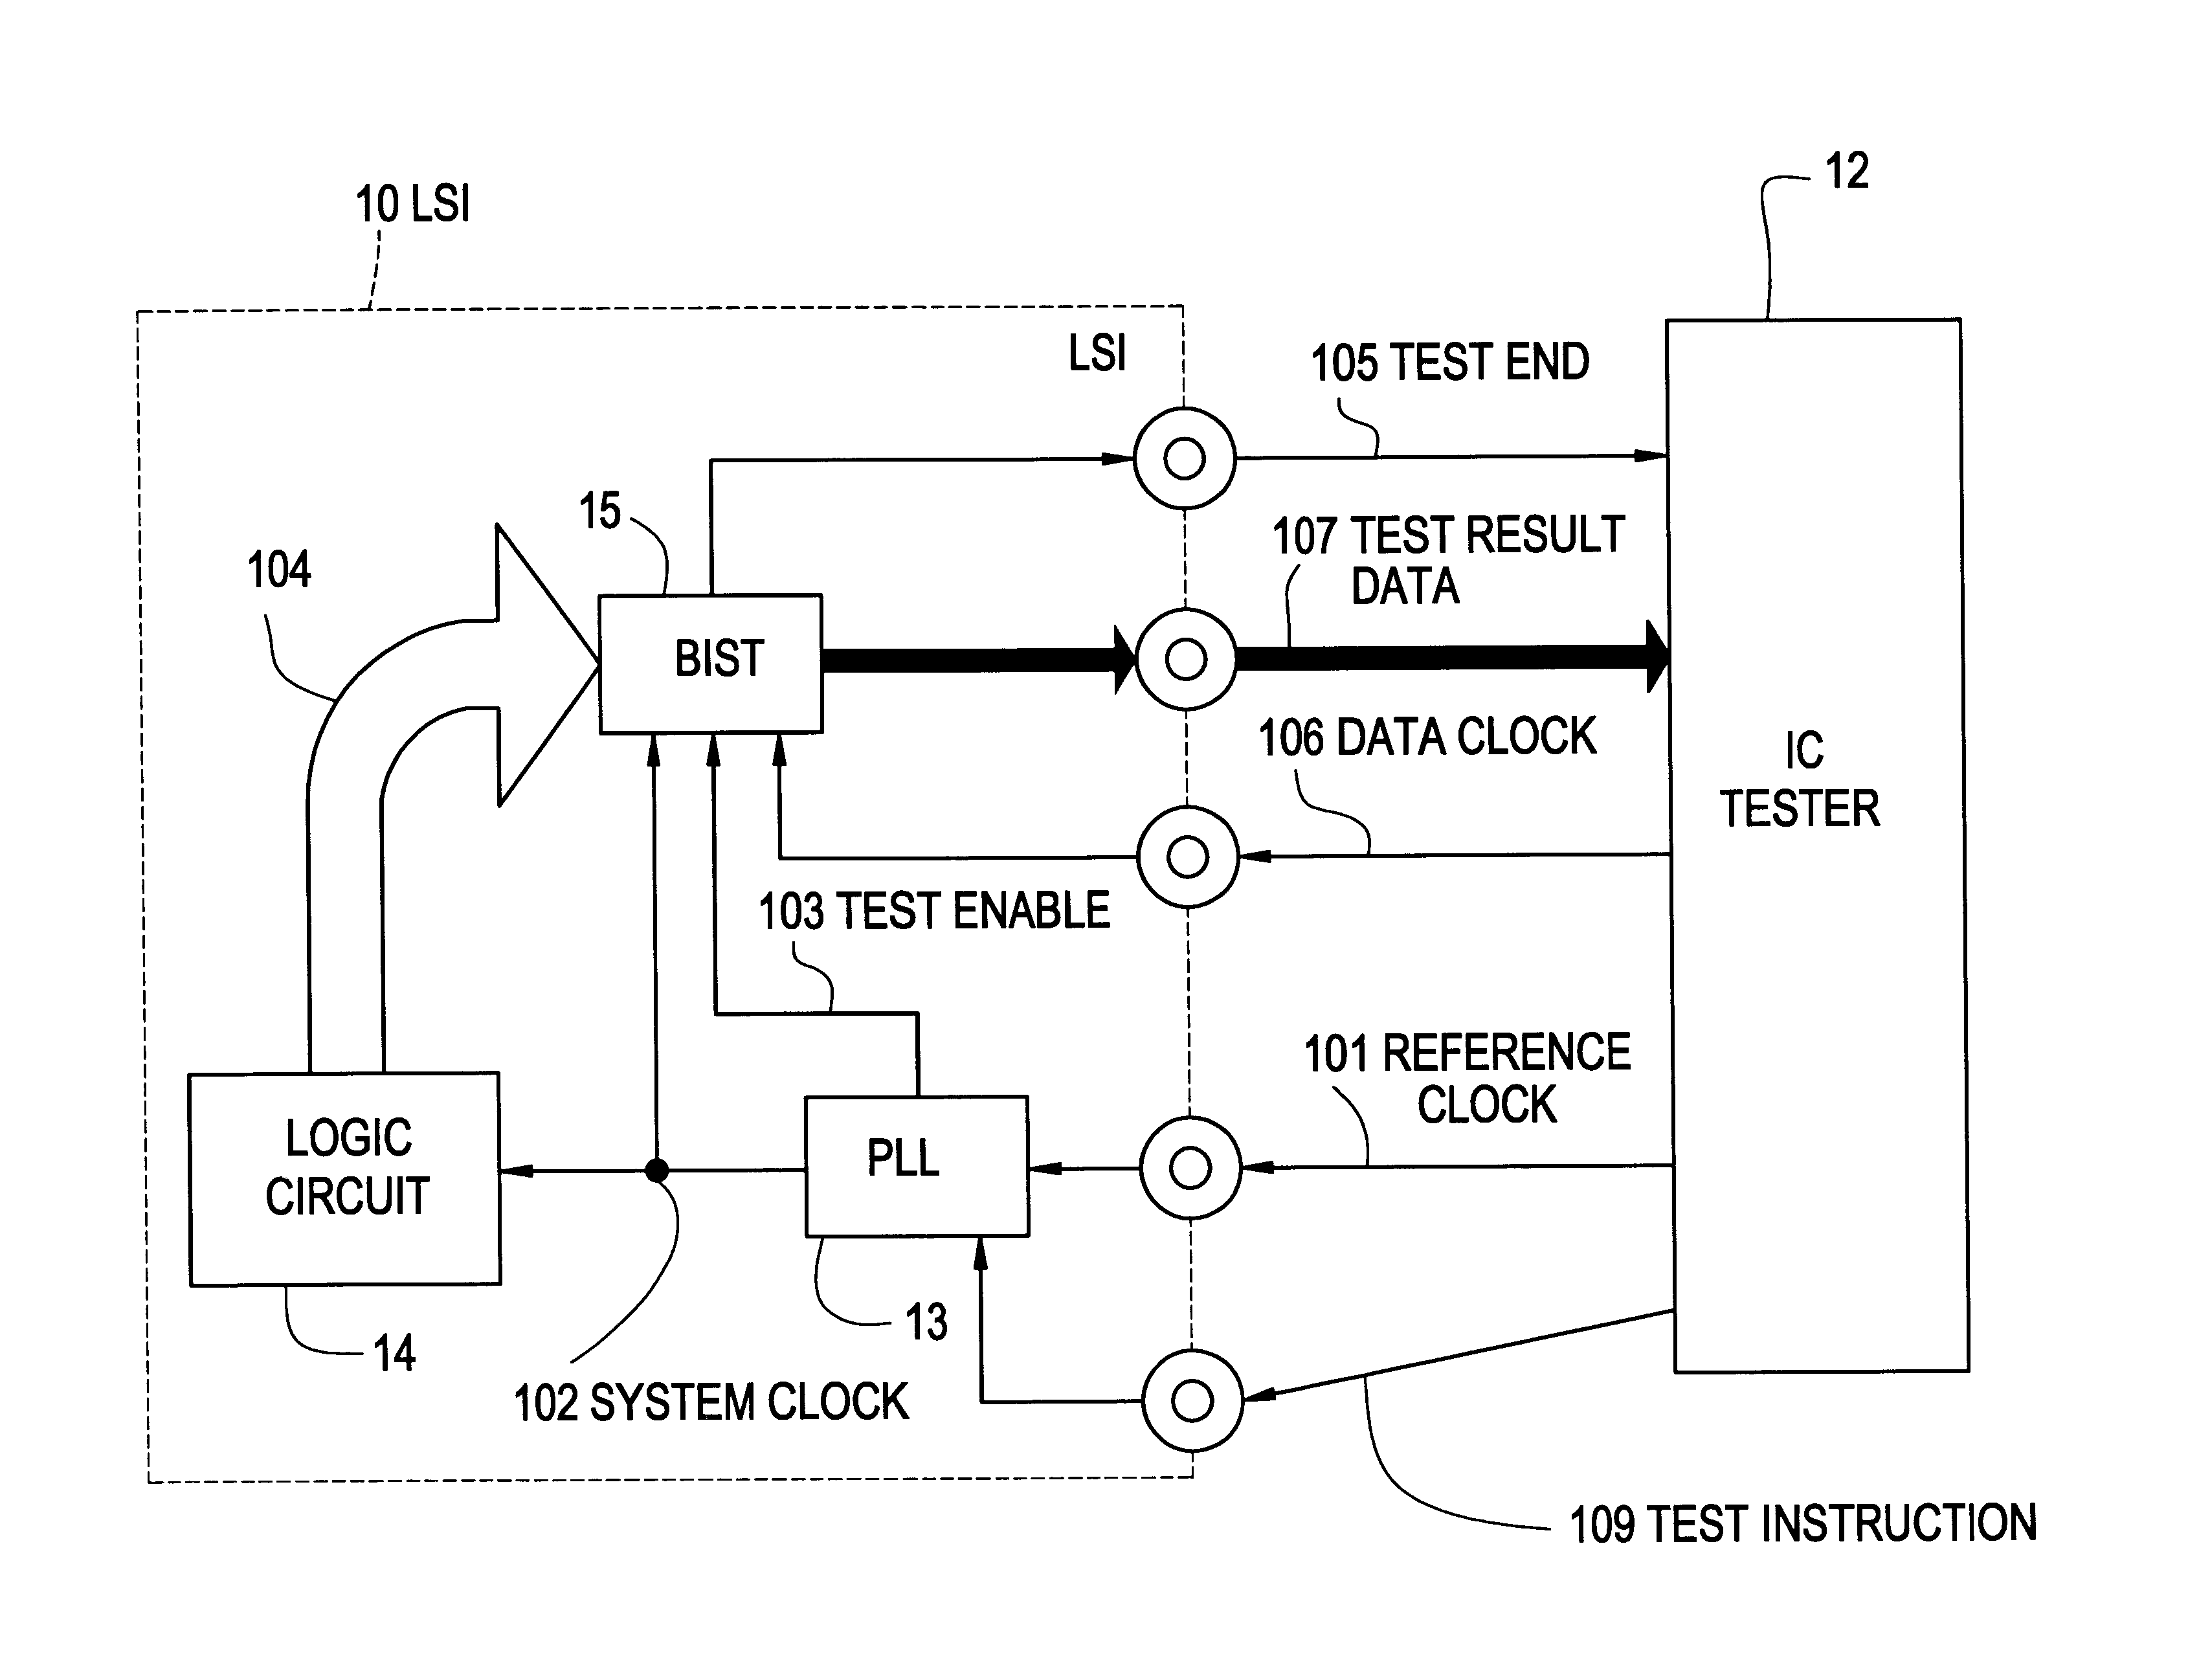 LSI having a built-in self-test circuit